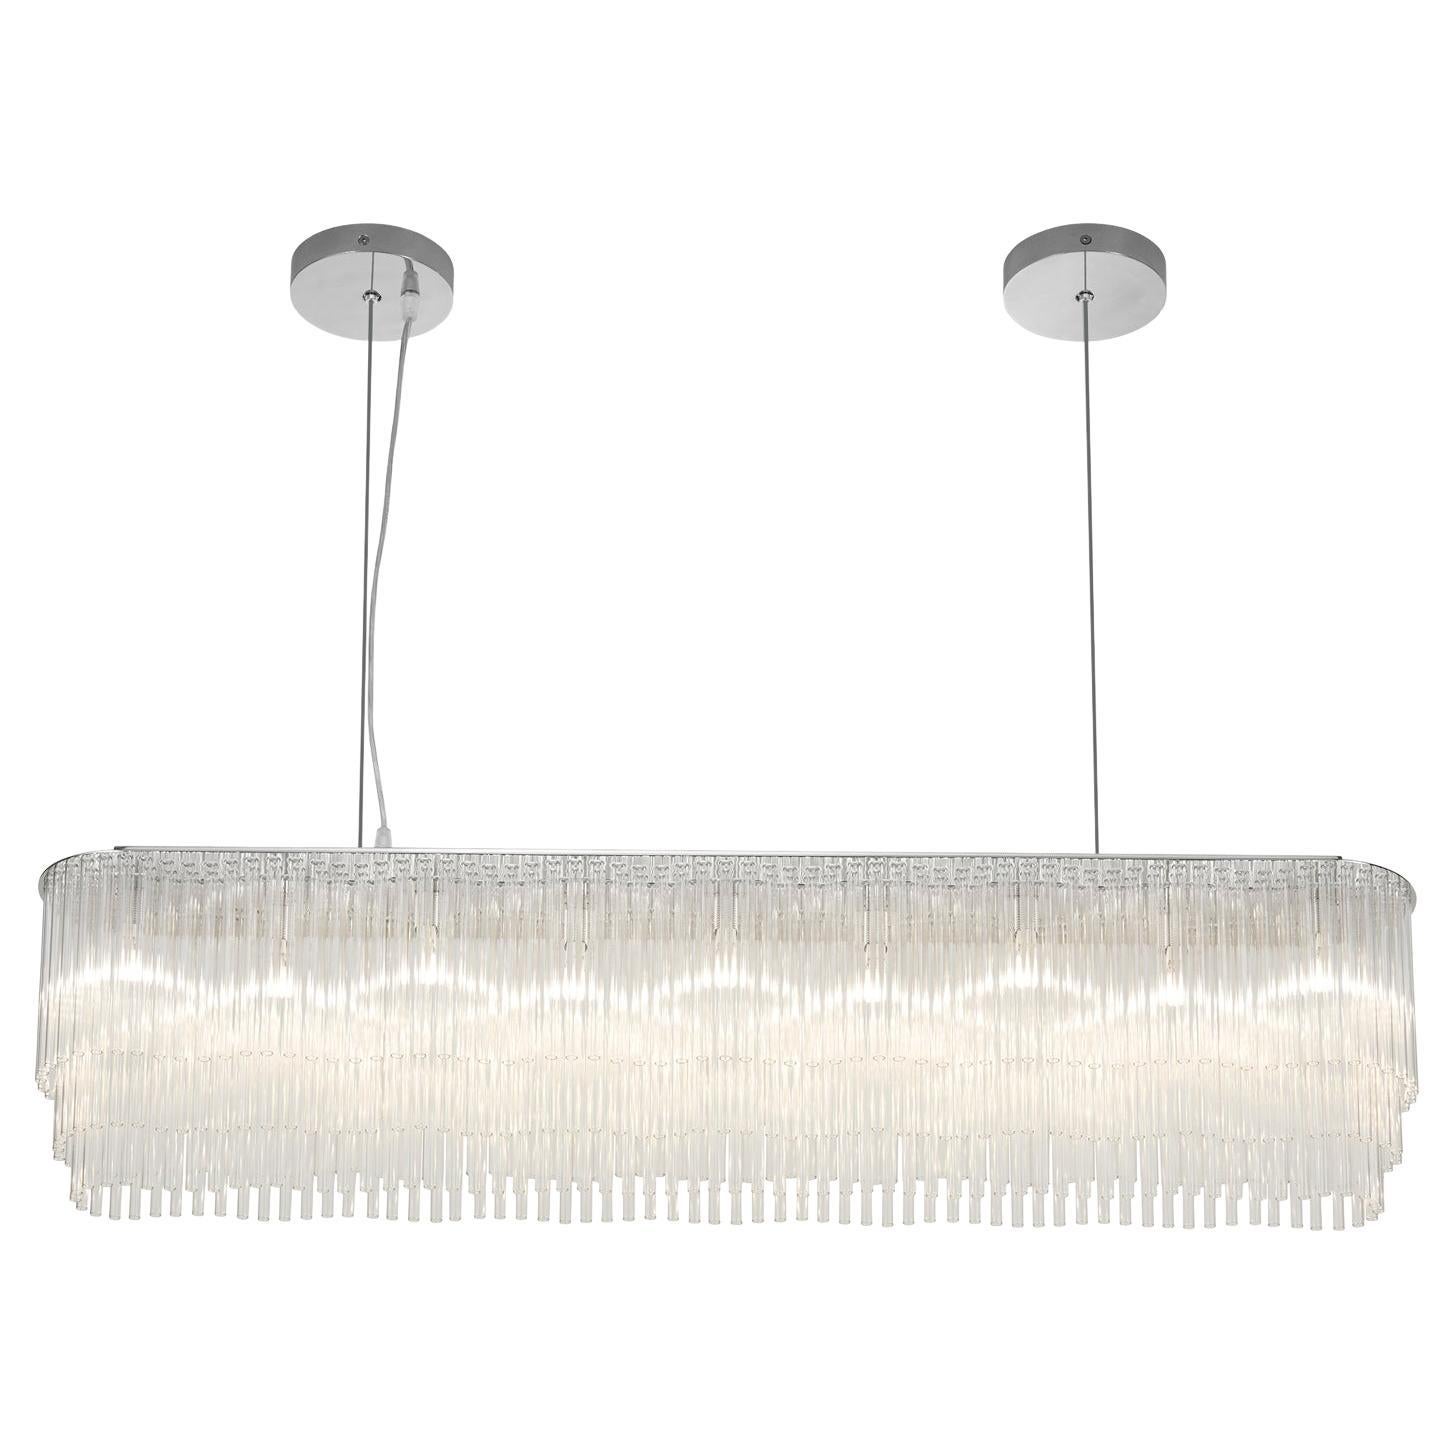 Linear Chandelier Thin 1445mm/58.75"  in Brushed Nickel / Tiered Glass Profile